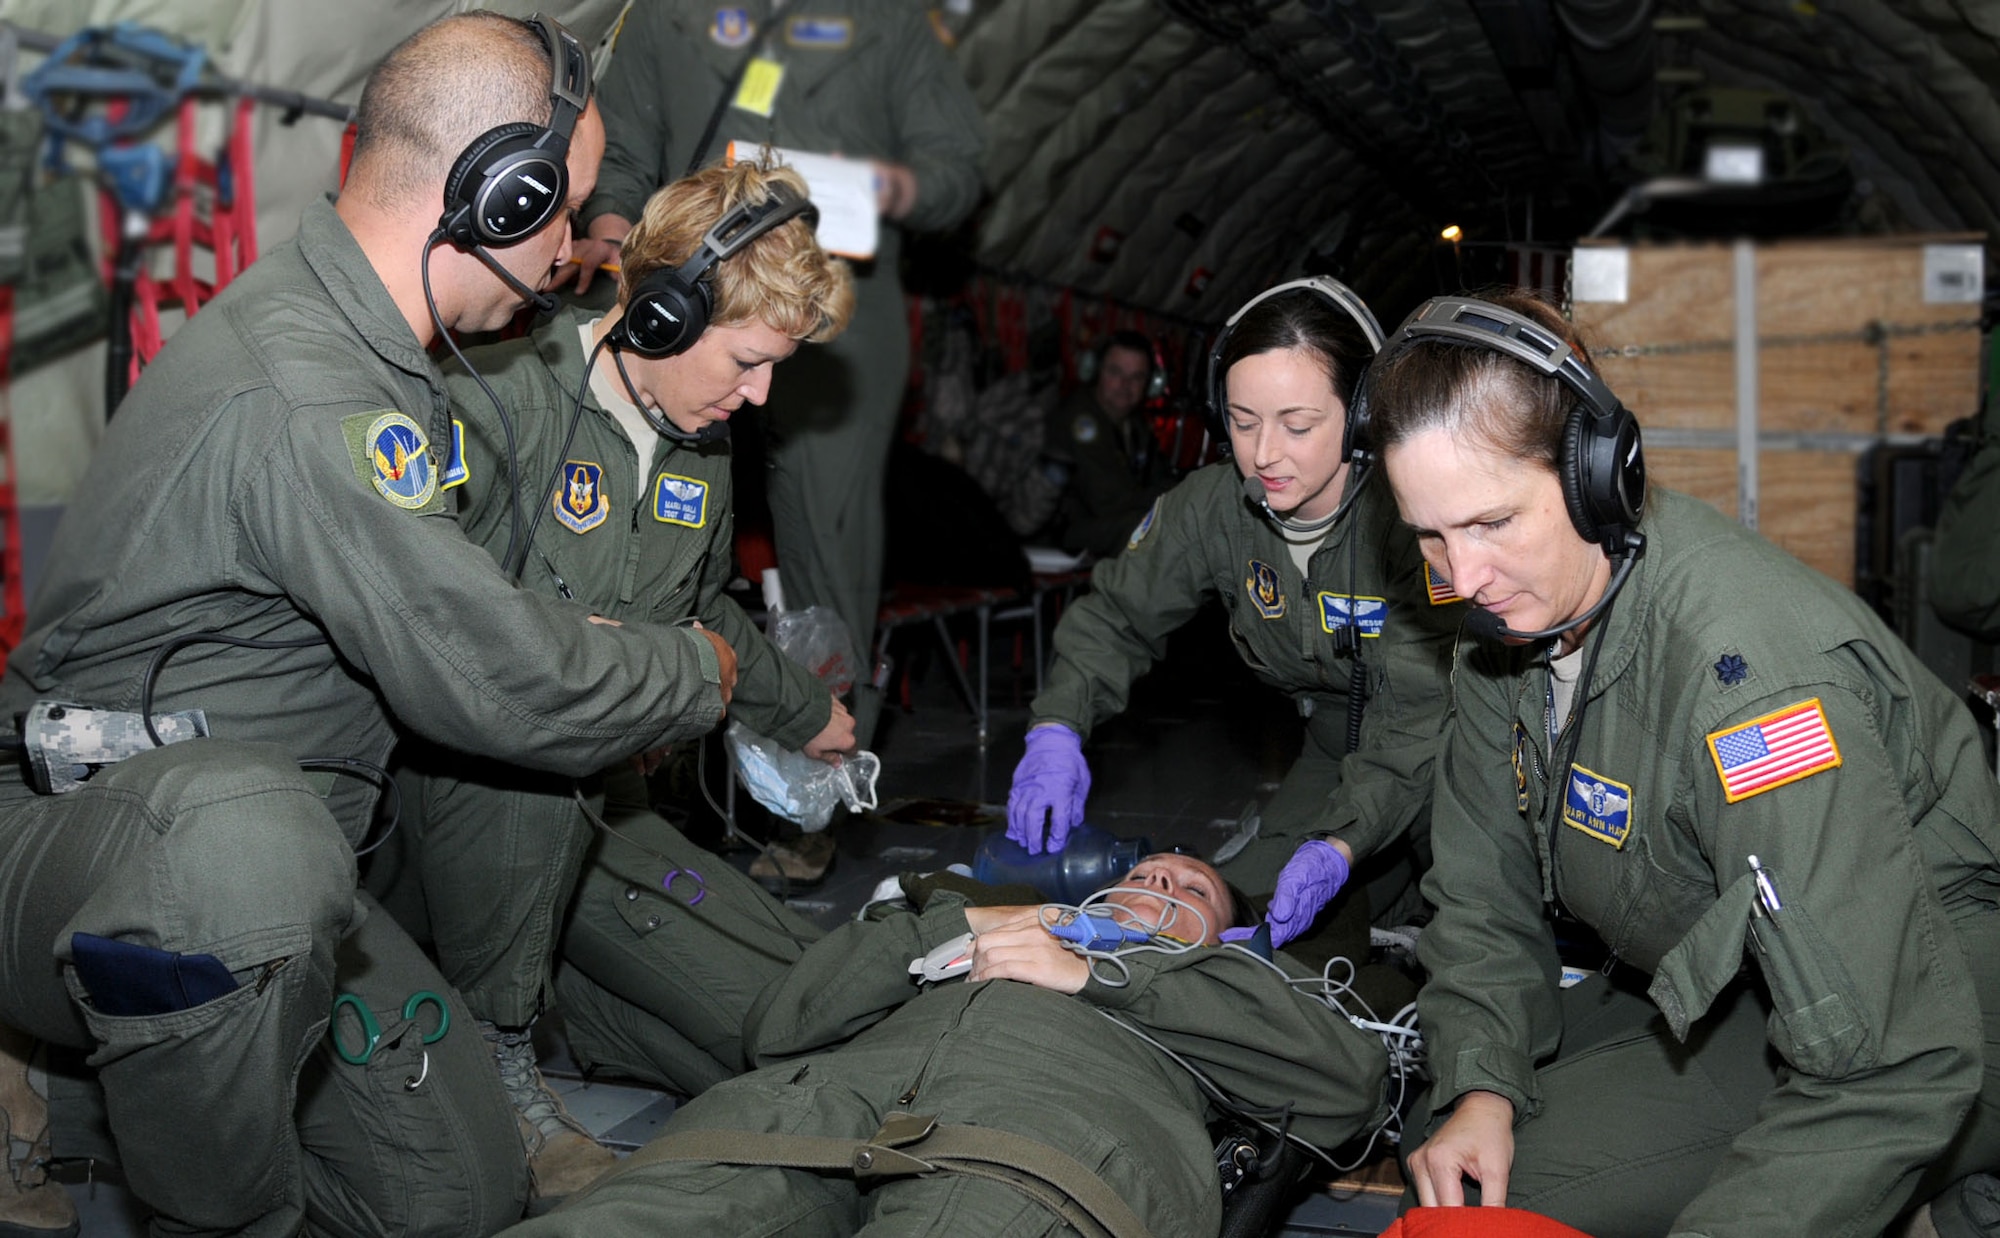 Aeromedical technicians from the 45th AES, MacDill AFB, Florida, respond to a simulated inflight medical emergency during a three-day training mission held Dec. 12, 2014. To stay proficient at their lifesaving skills, the technicians routinely climb aboard a MacDill based KC-135 to fine tune their caregiving skills. (U.S. Air force photo/Tech. Sgt. Peter Dean/released)